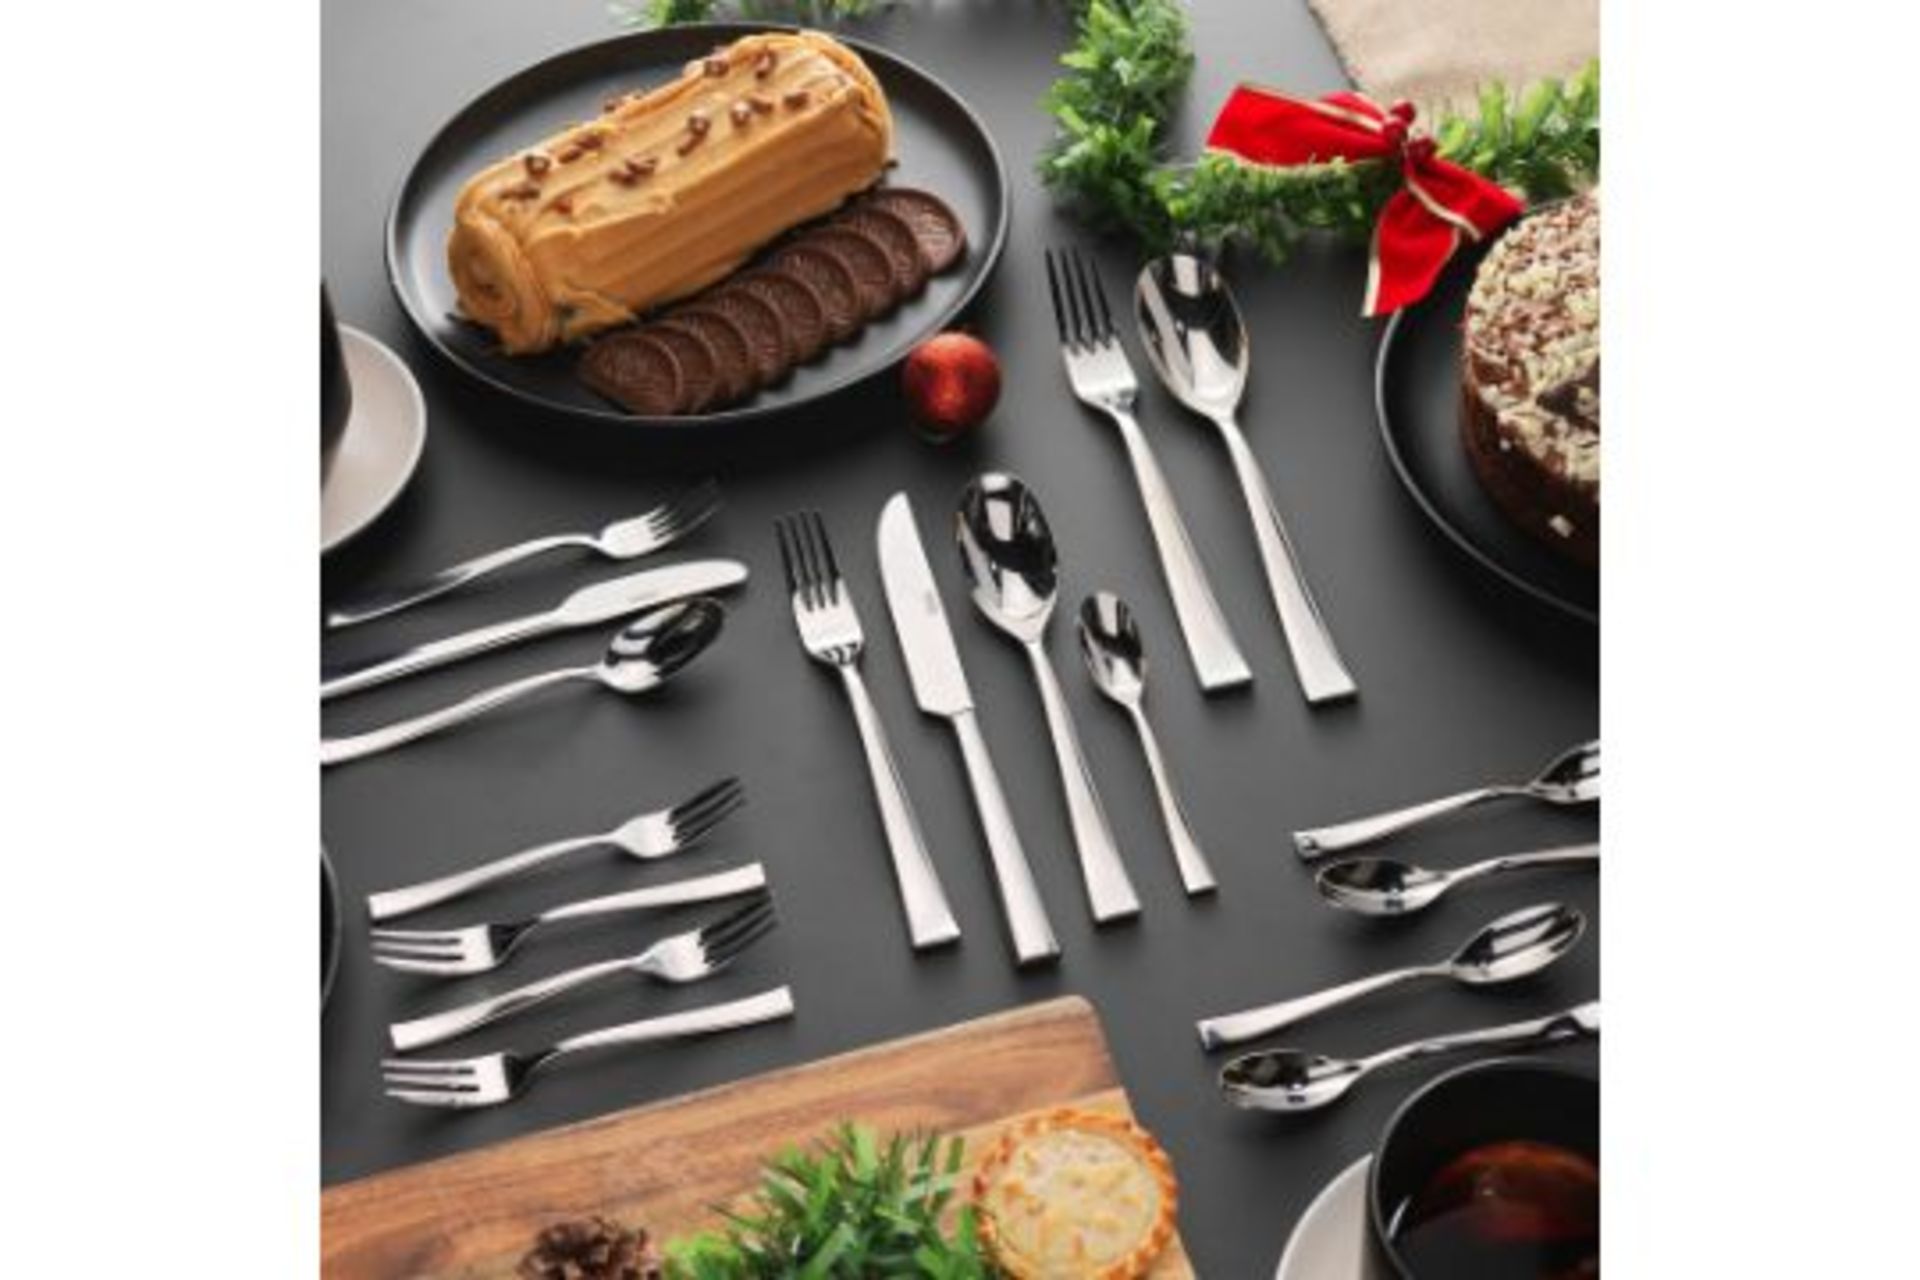 48 x New Boxed Sets of 3 Thomas Children’s Cutlery Set Stainless Steel Easy Grip Handle. RRP £24. - Image 6 of 8